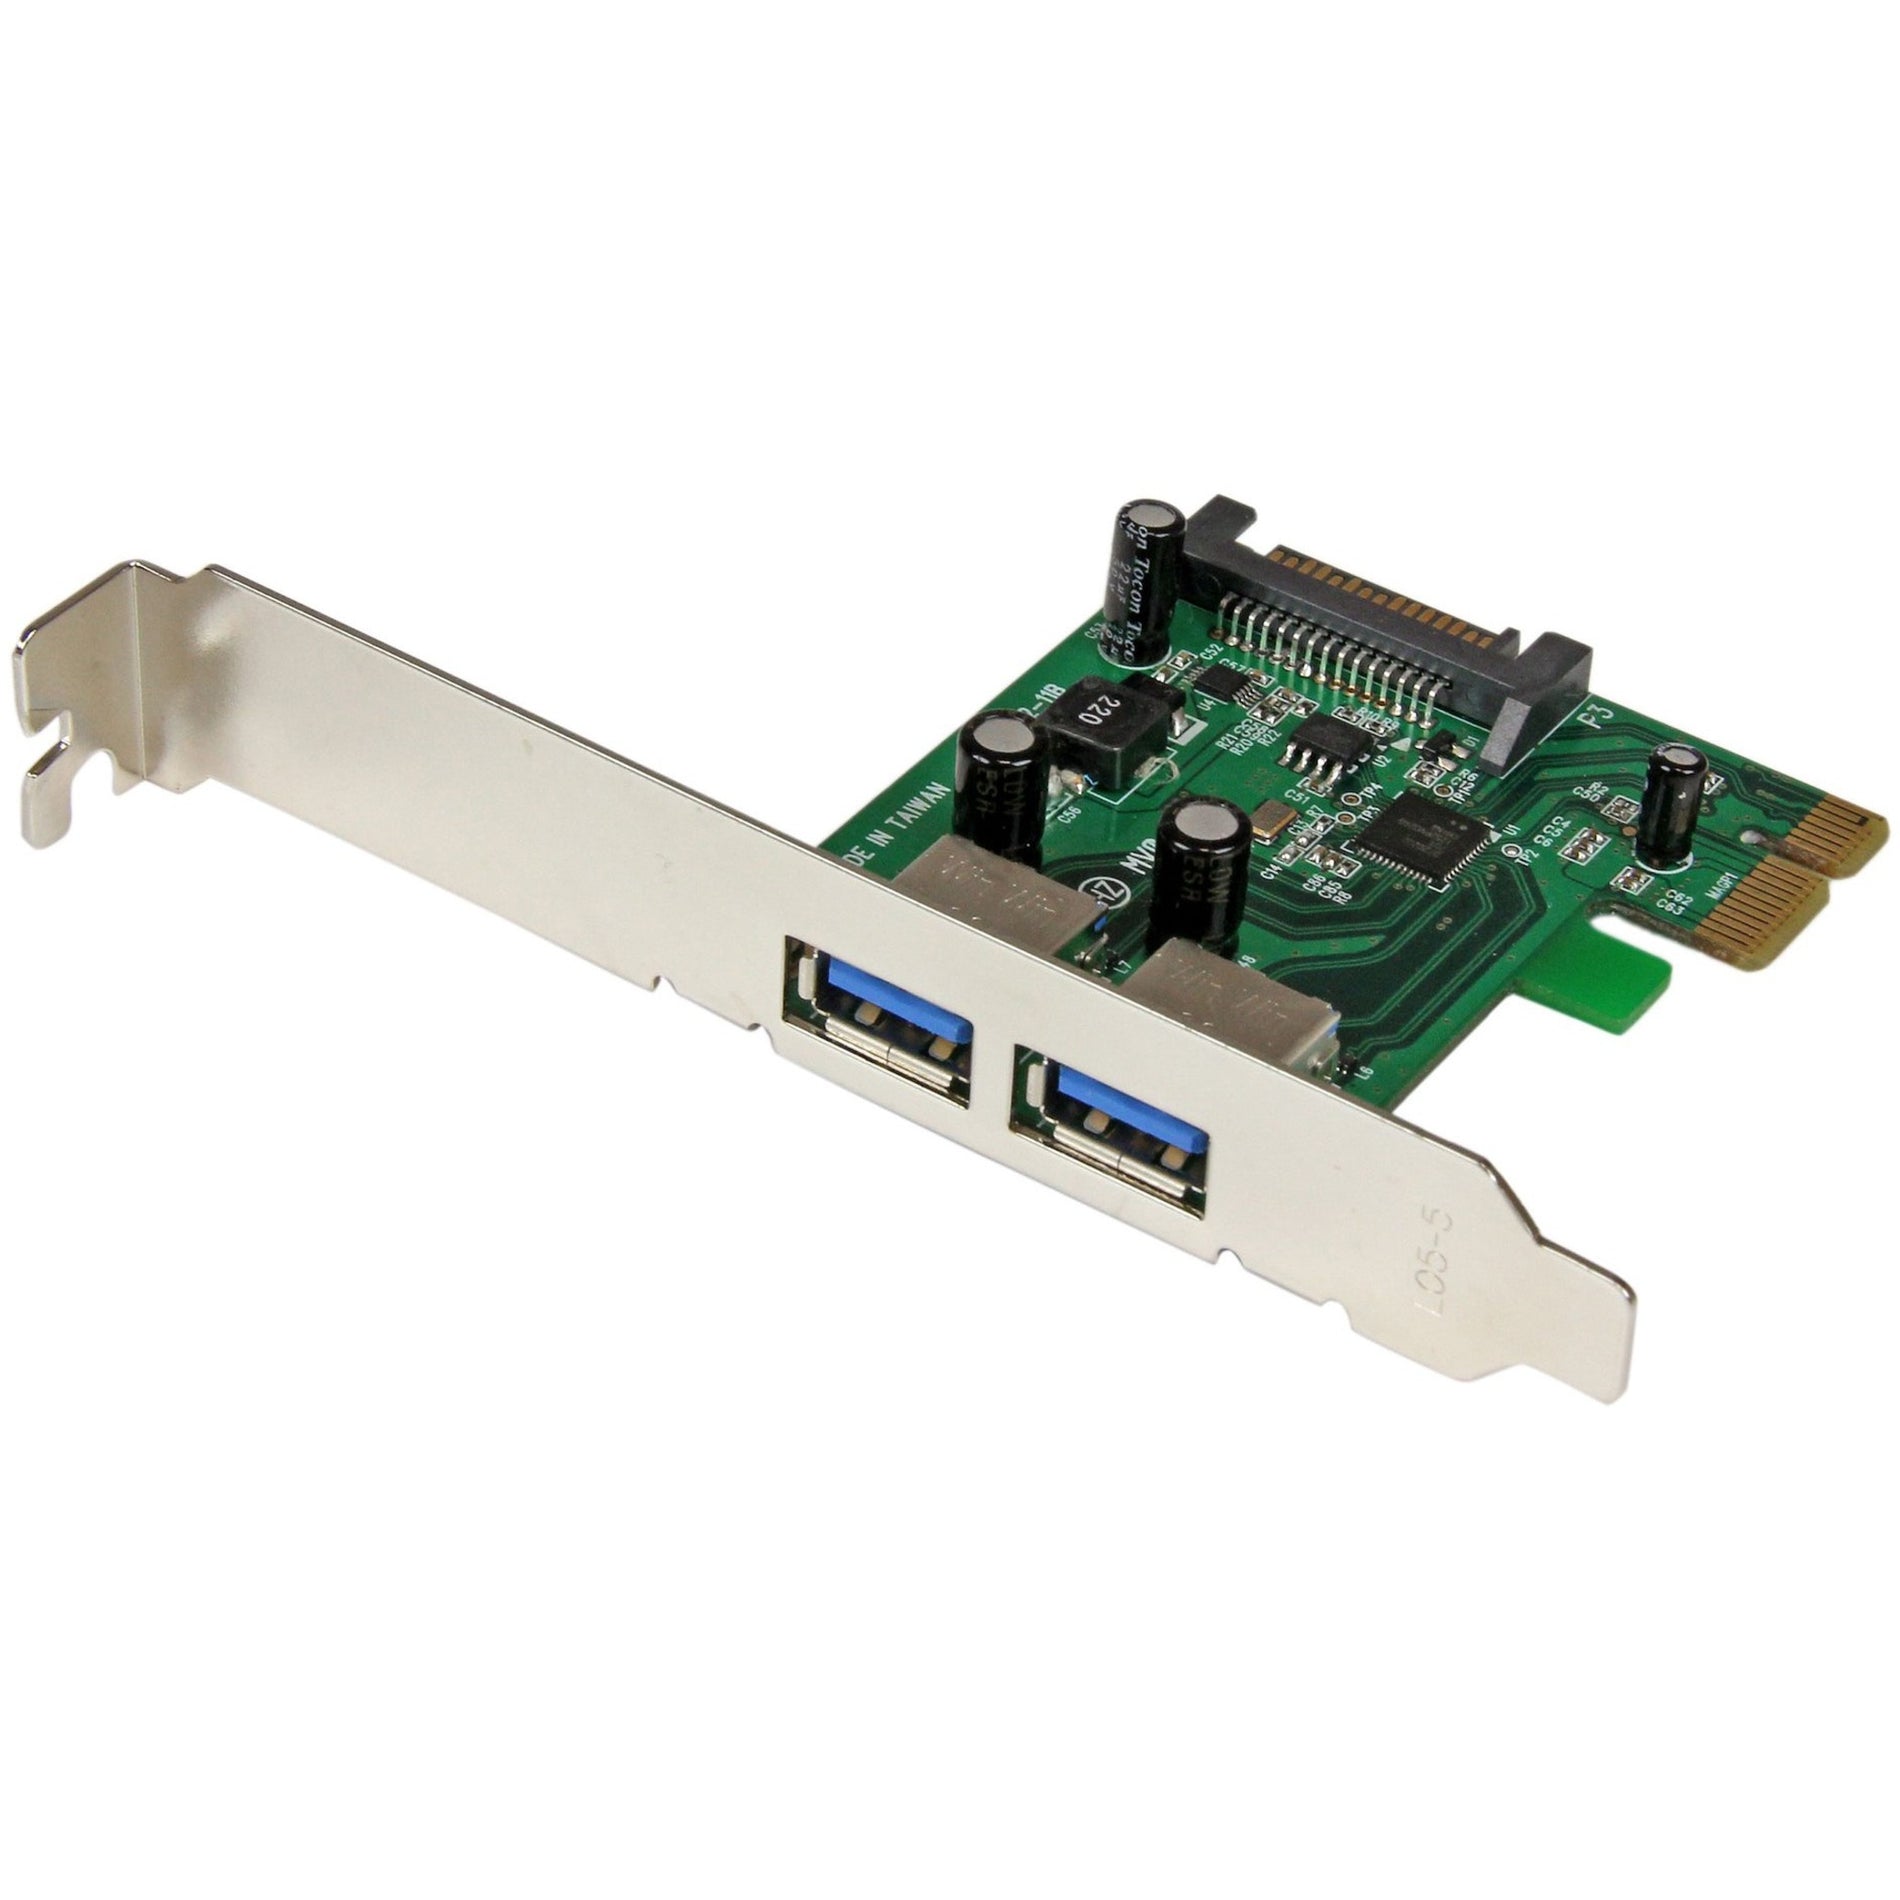 StarTech.com PEXUSB3S24 2 Port PCI Express (PCIe) SuperSpeed USB 3.0 Card Adapter with UASP - SATA Power, High-Speed Data Transfer and Power for Your PC